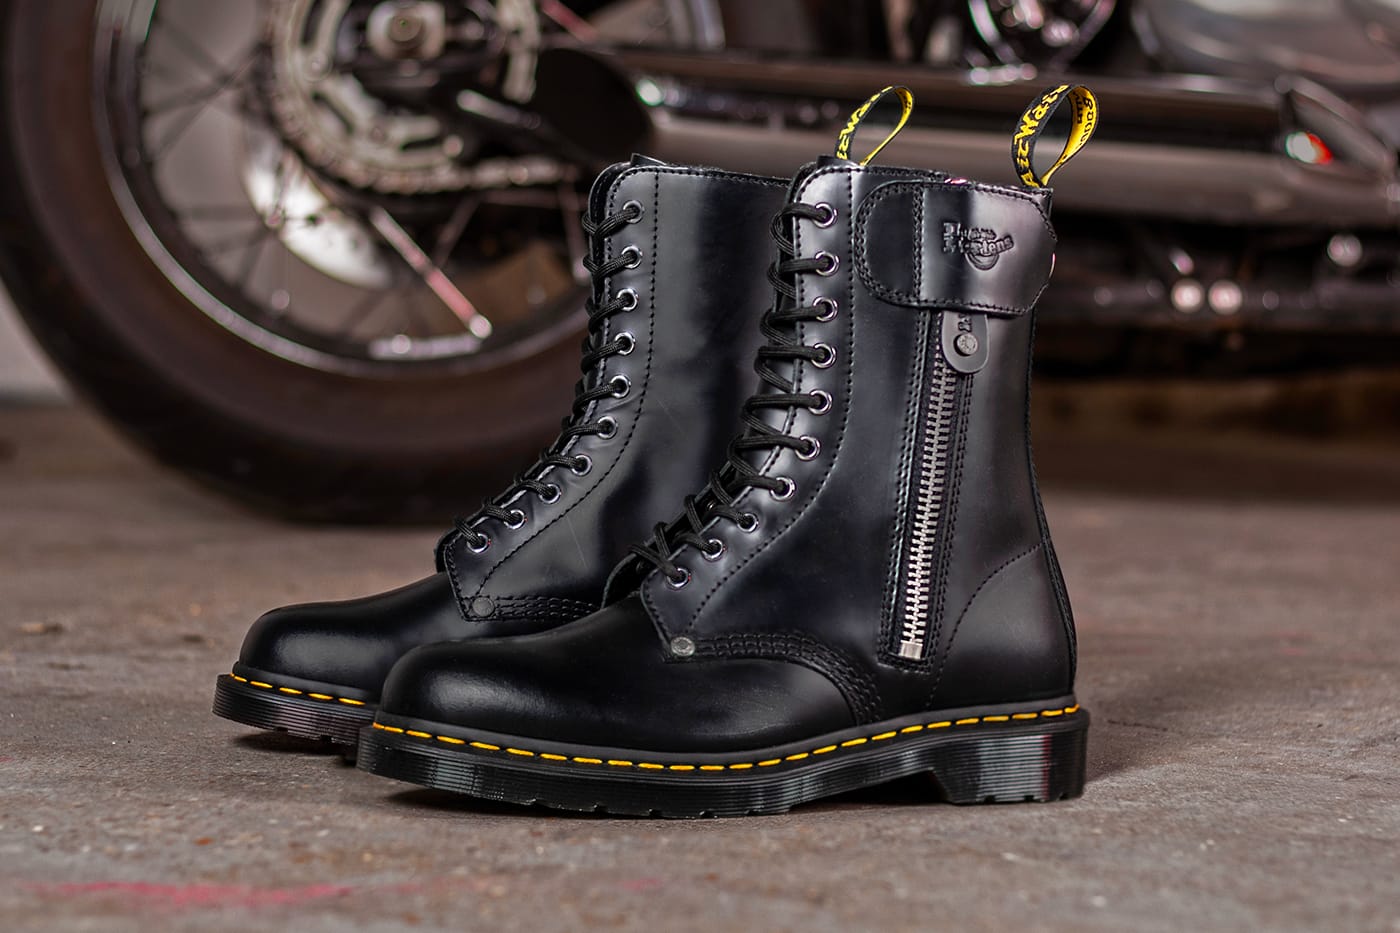 UK 9 DR MARTEN GARRICK CLASSIC MOTORCYCLE LEATHER BOOTS D30 ARMOUR